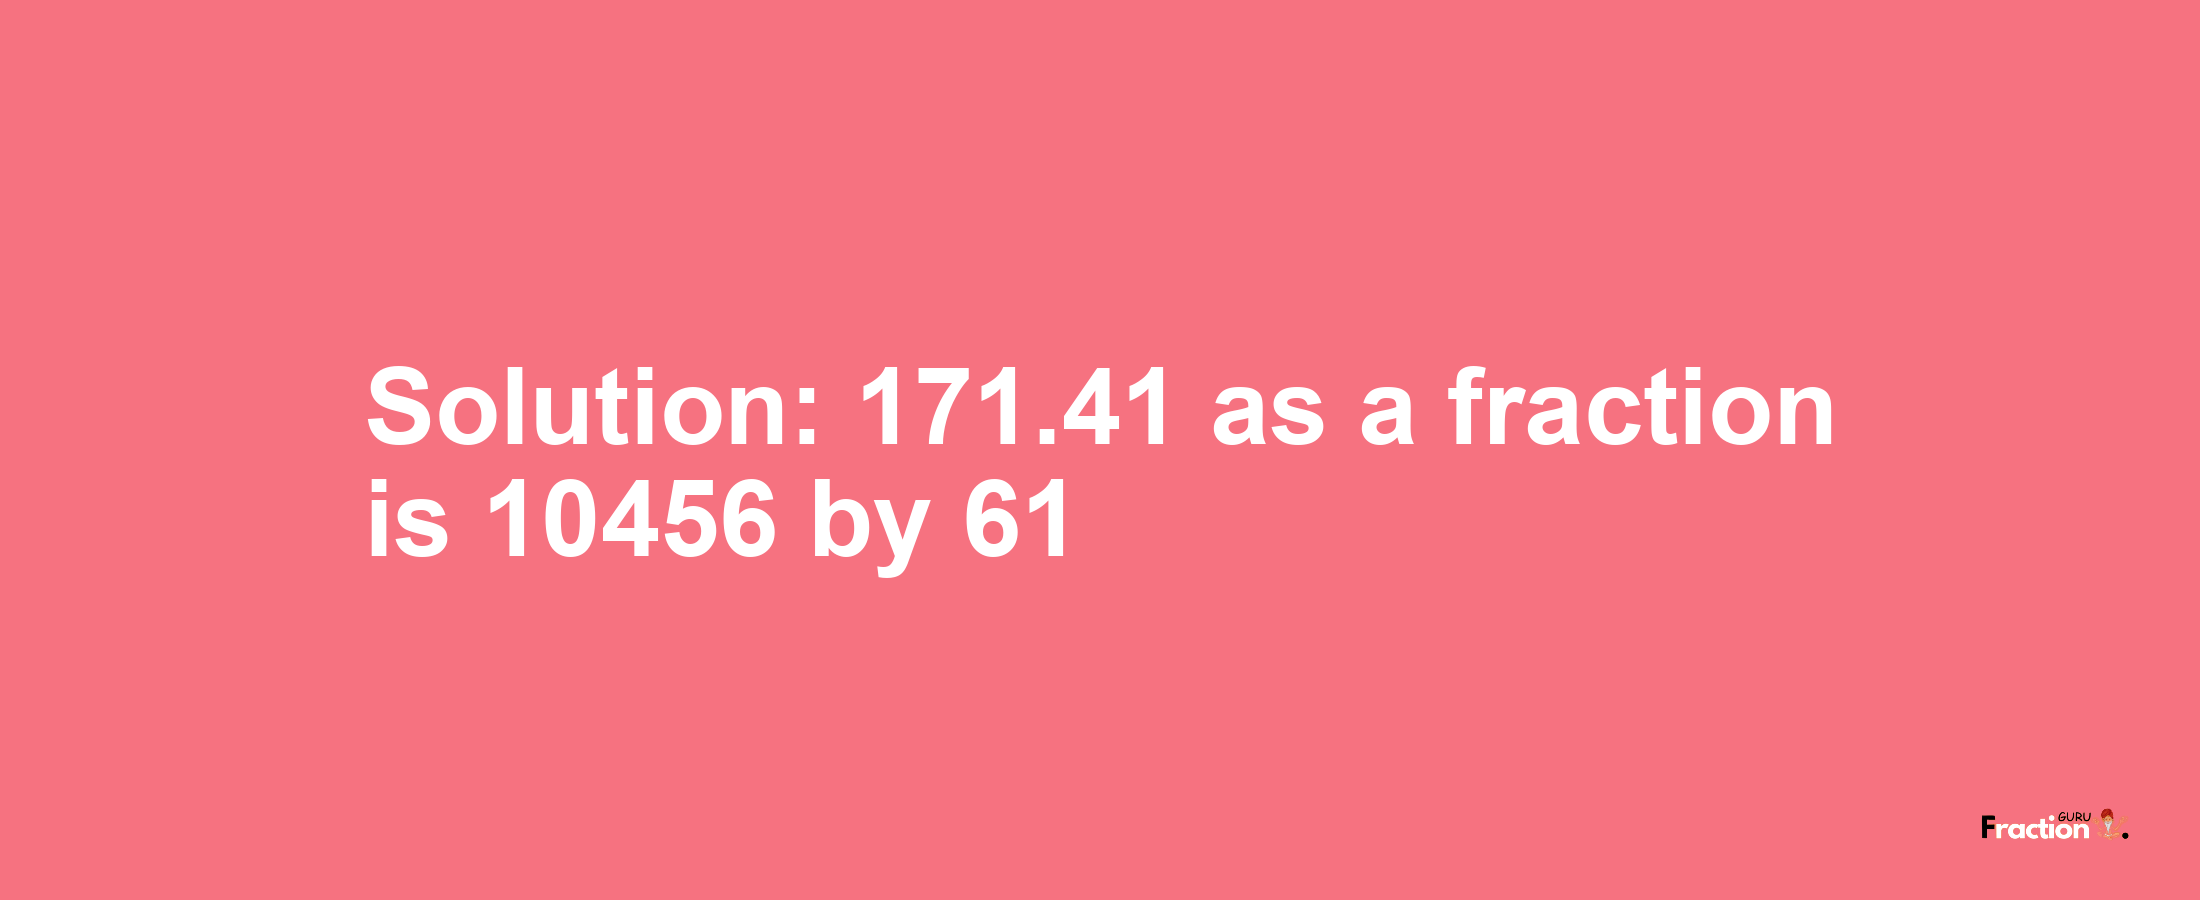 Solution:171.41 as a fraction is 10456/61